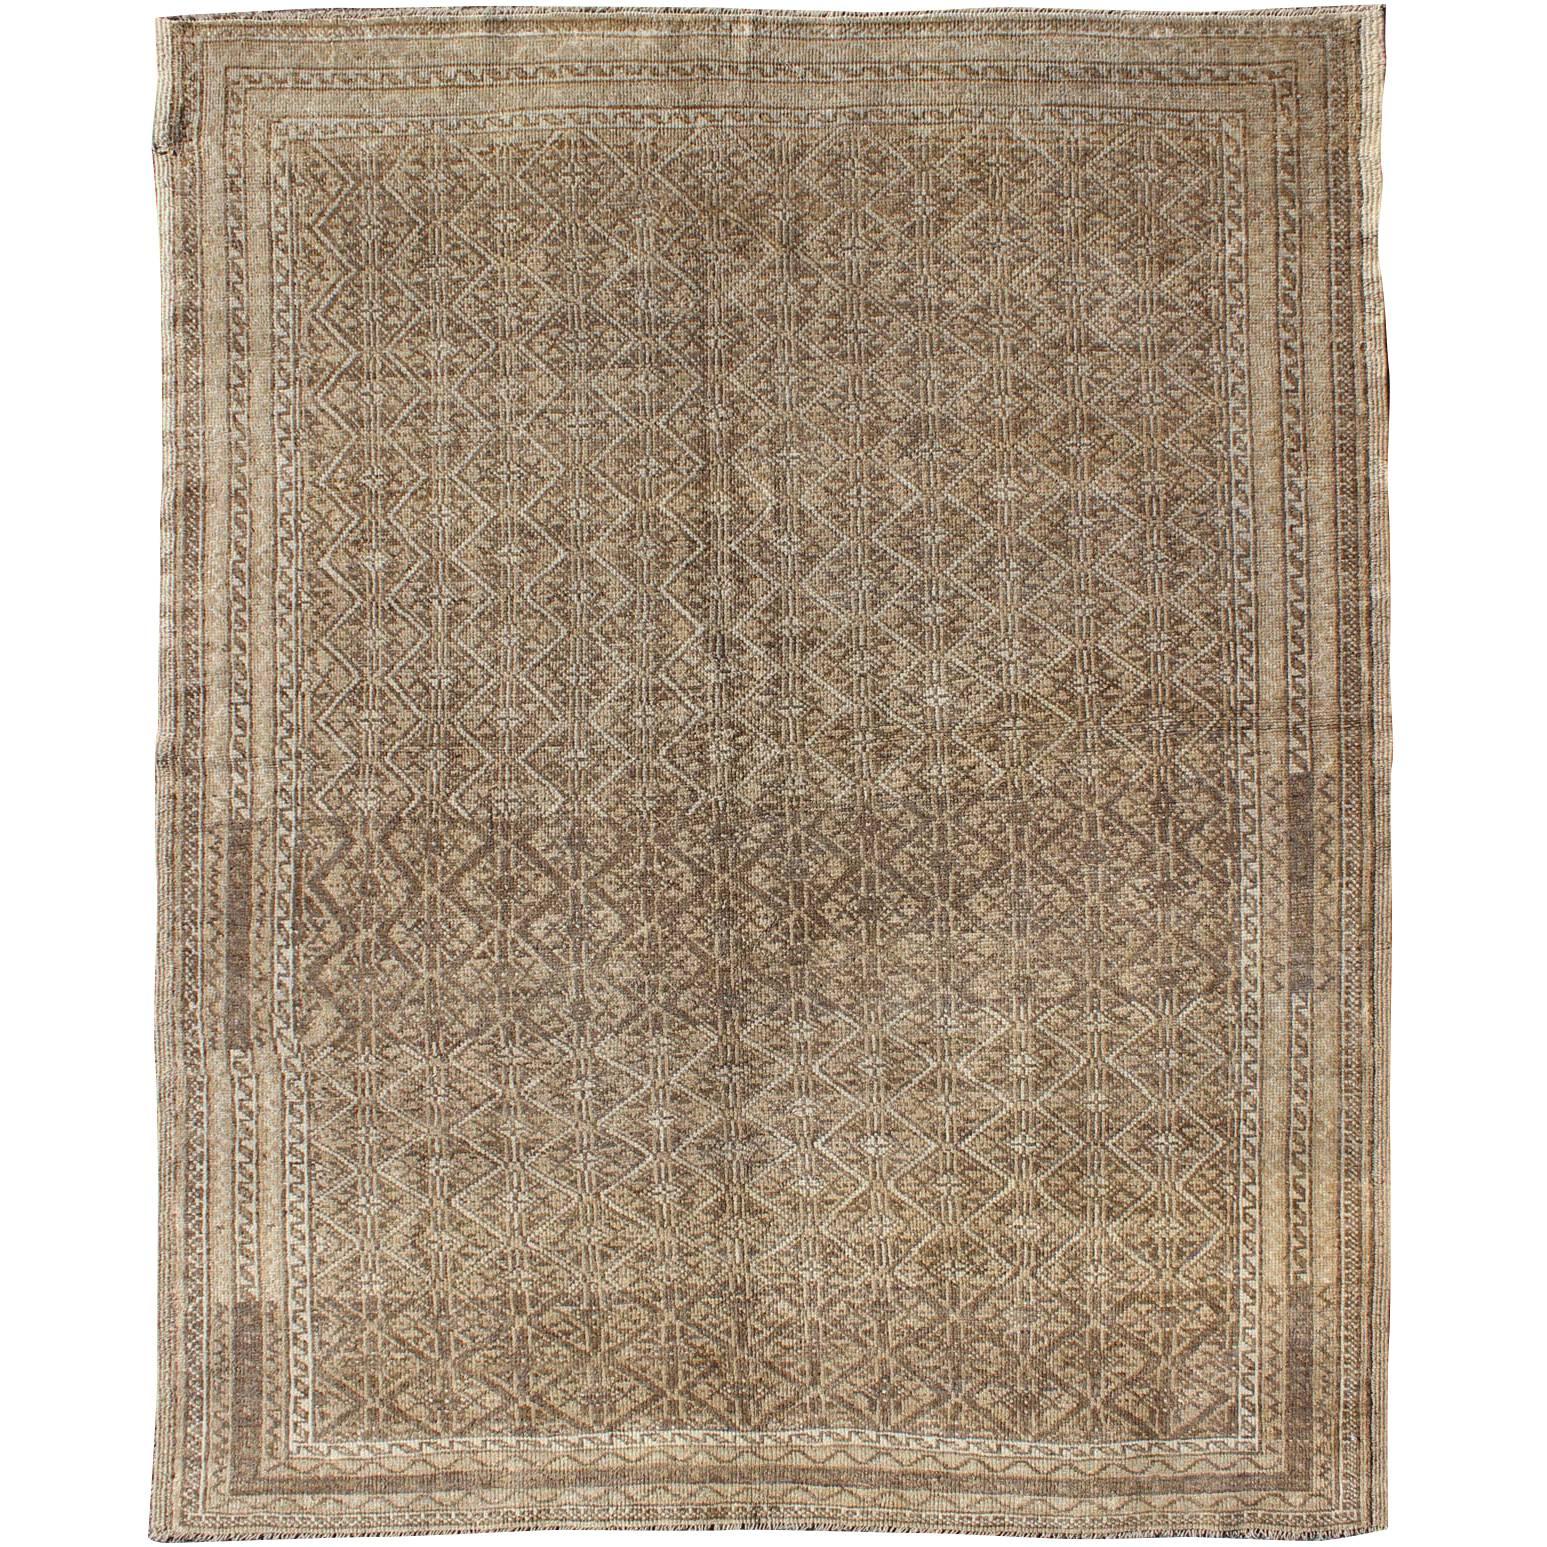 Unique Turkish Rug with Brown and Neutral Colors For Sale